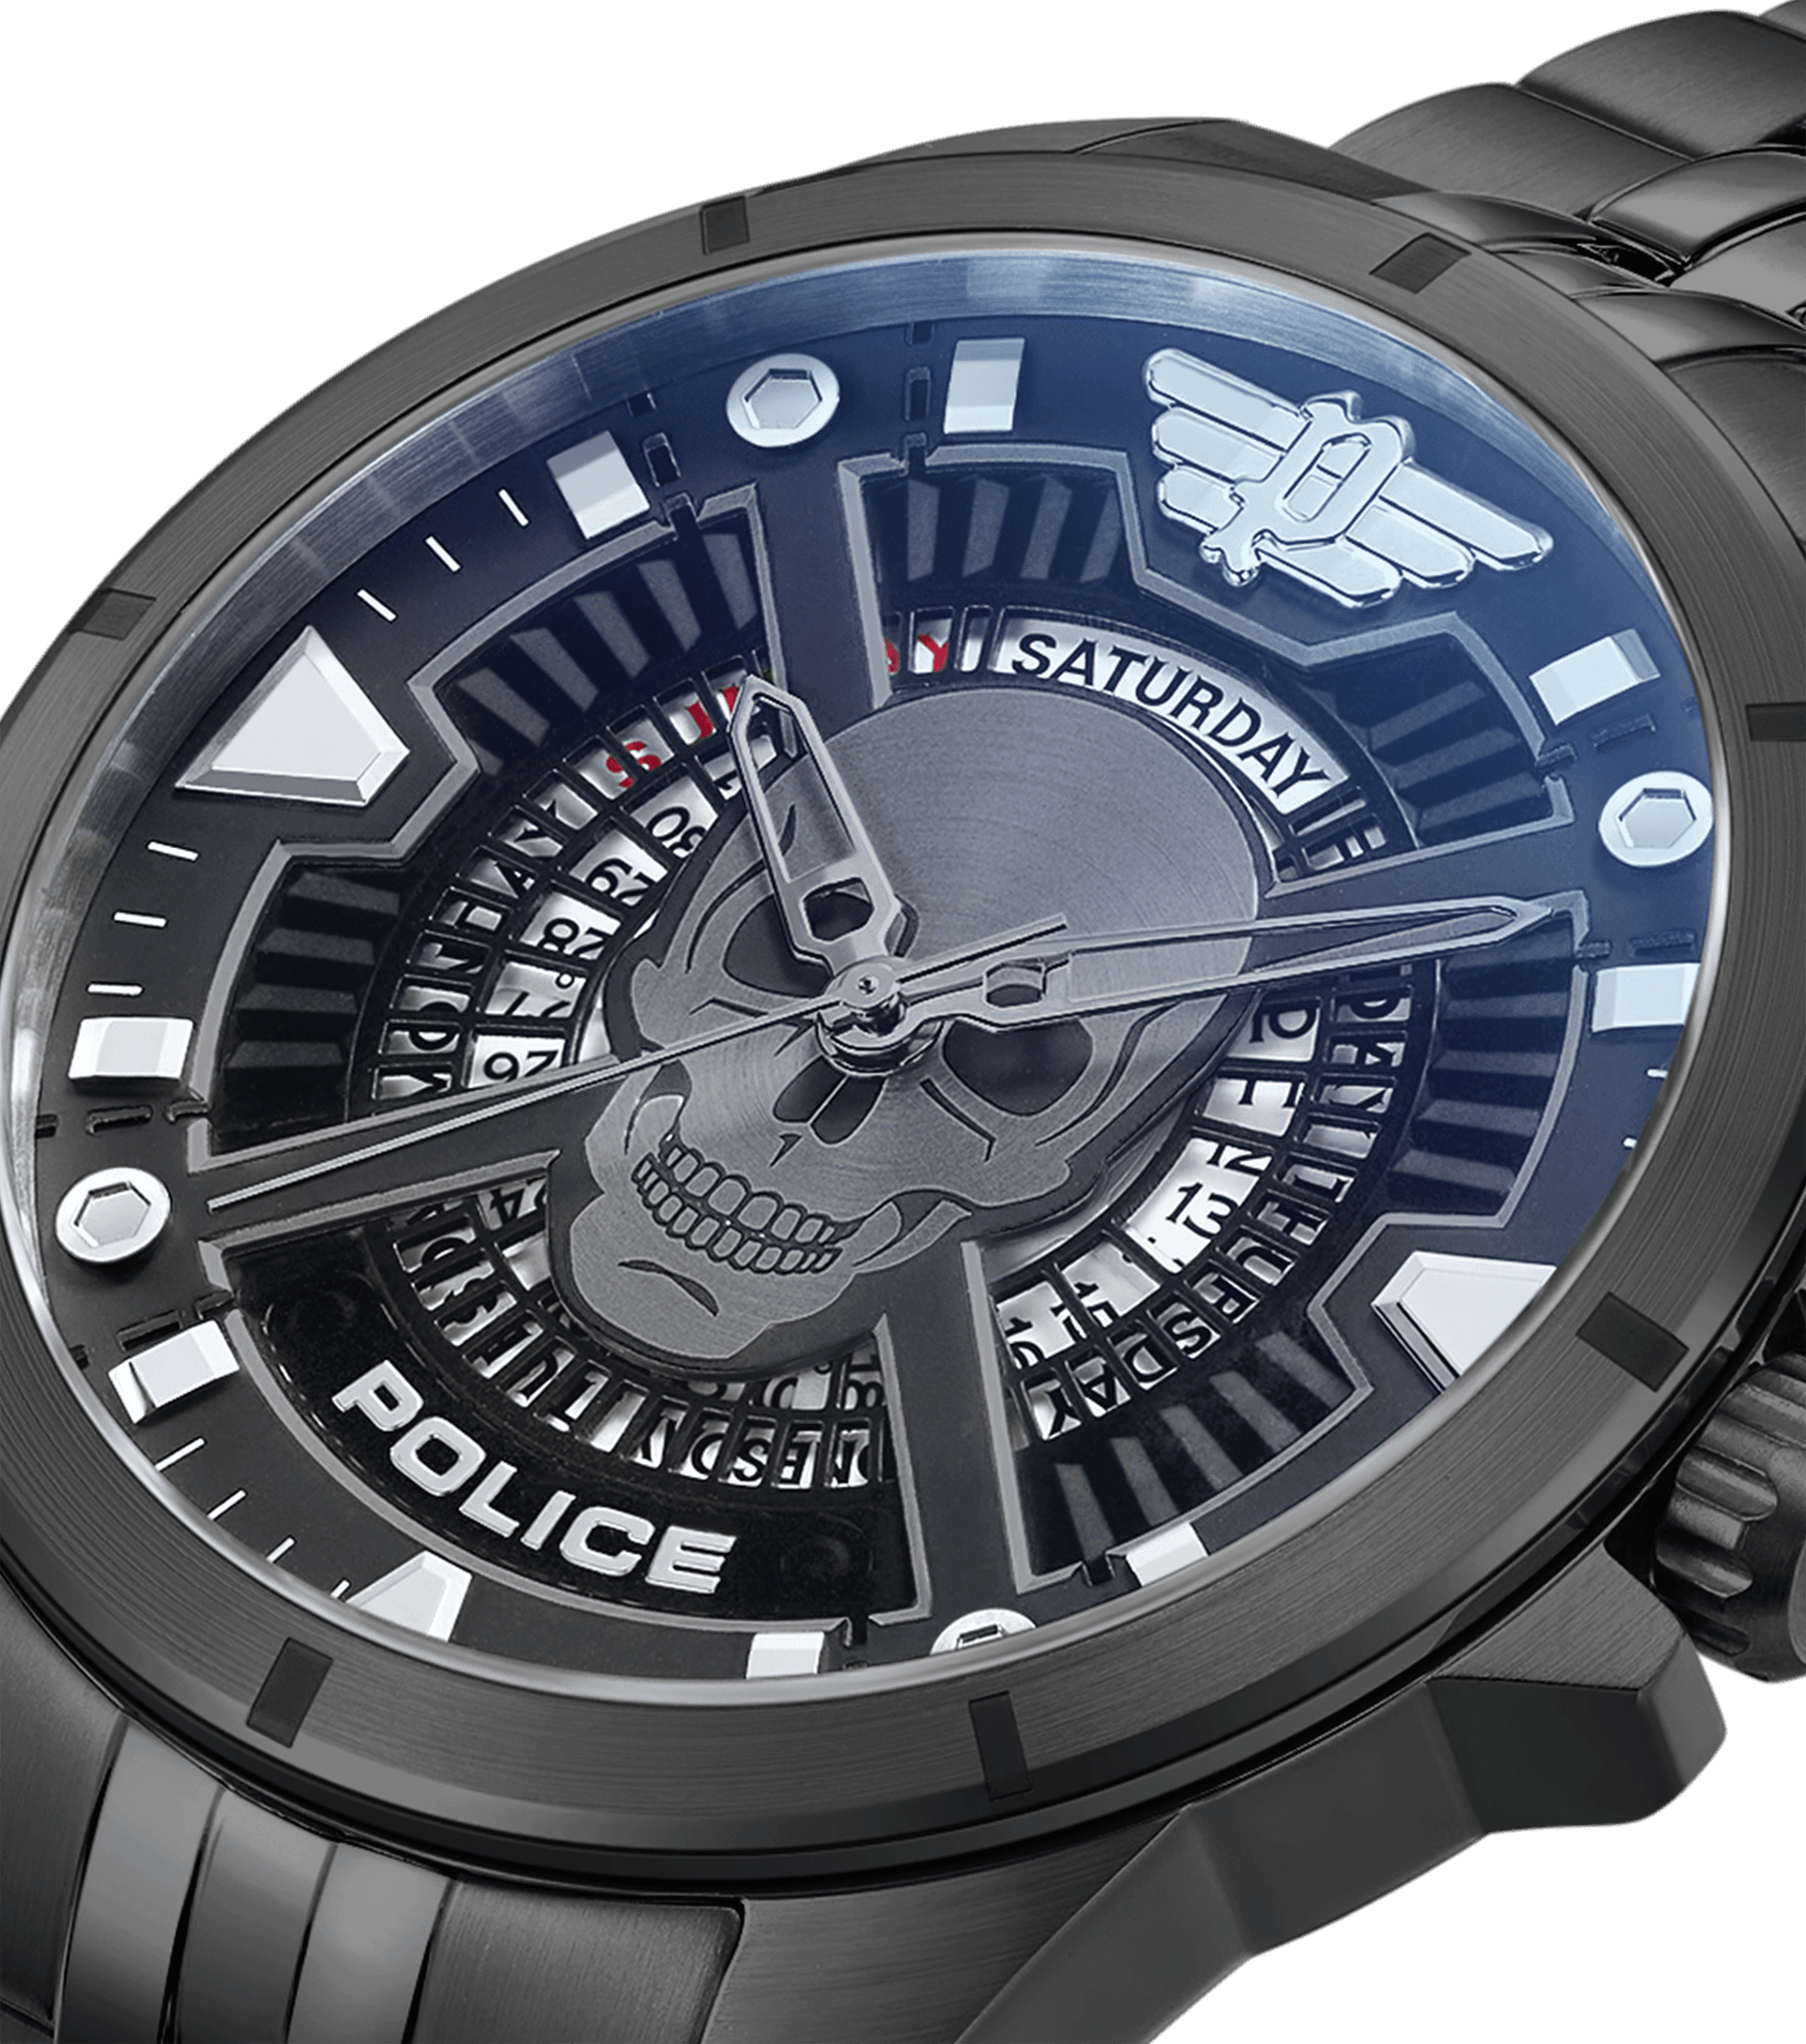 Police watches - Malawi Watch Police For Men Silver, Silver